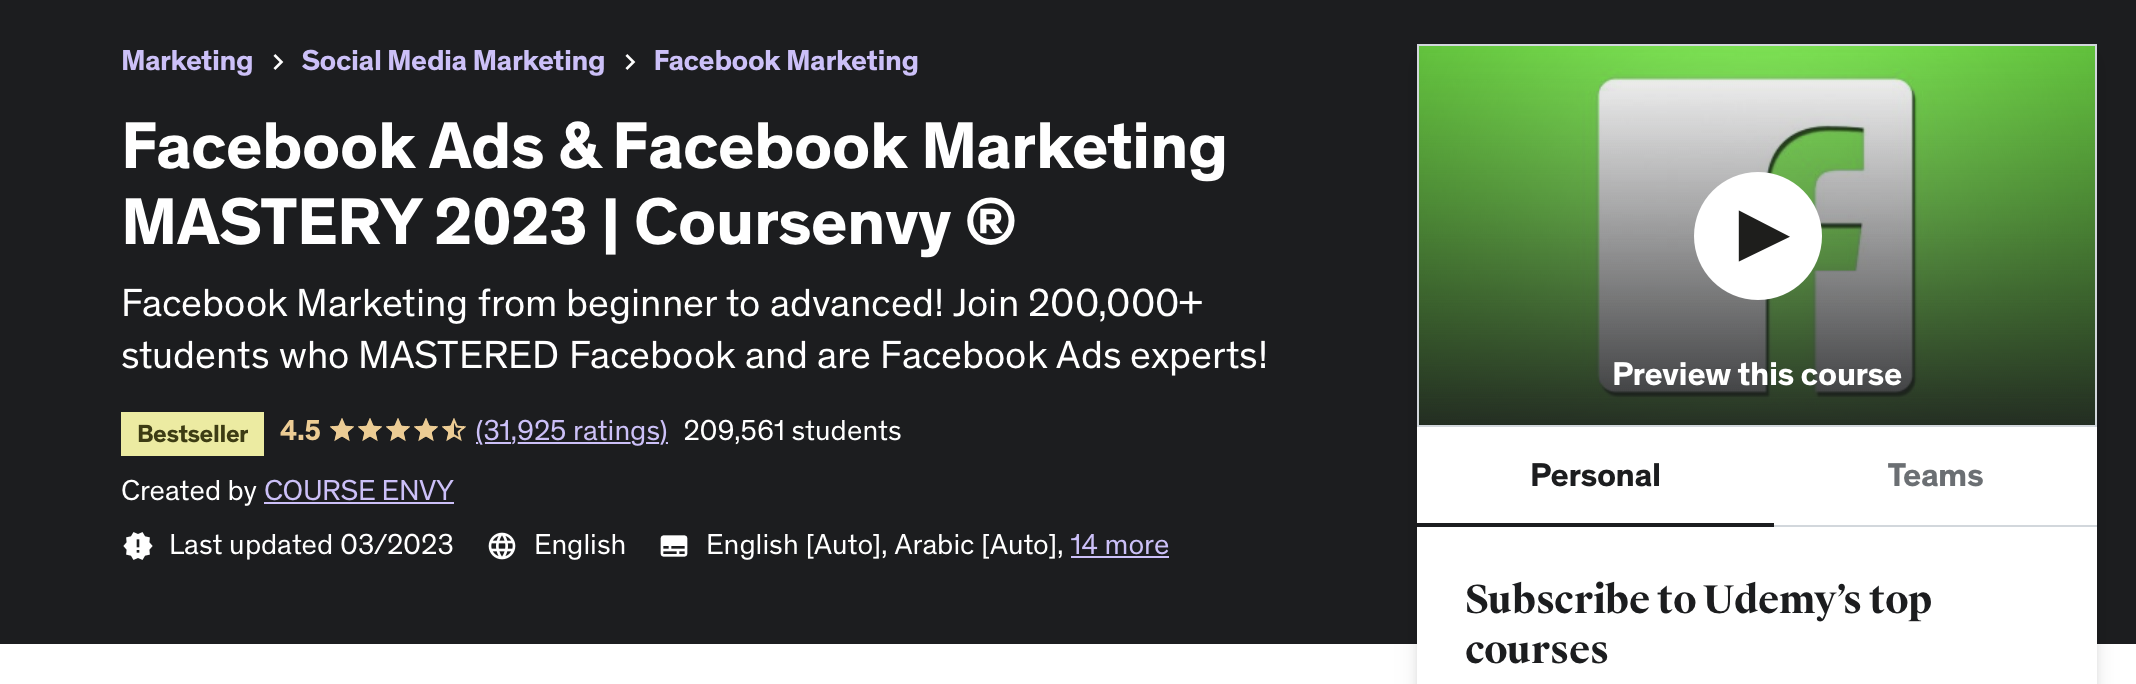 Facebook Ads and Facebook Marketing Mastery 2023